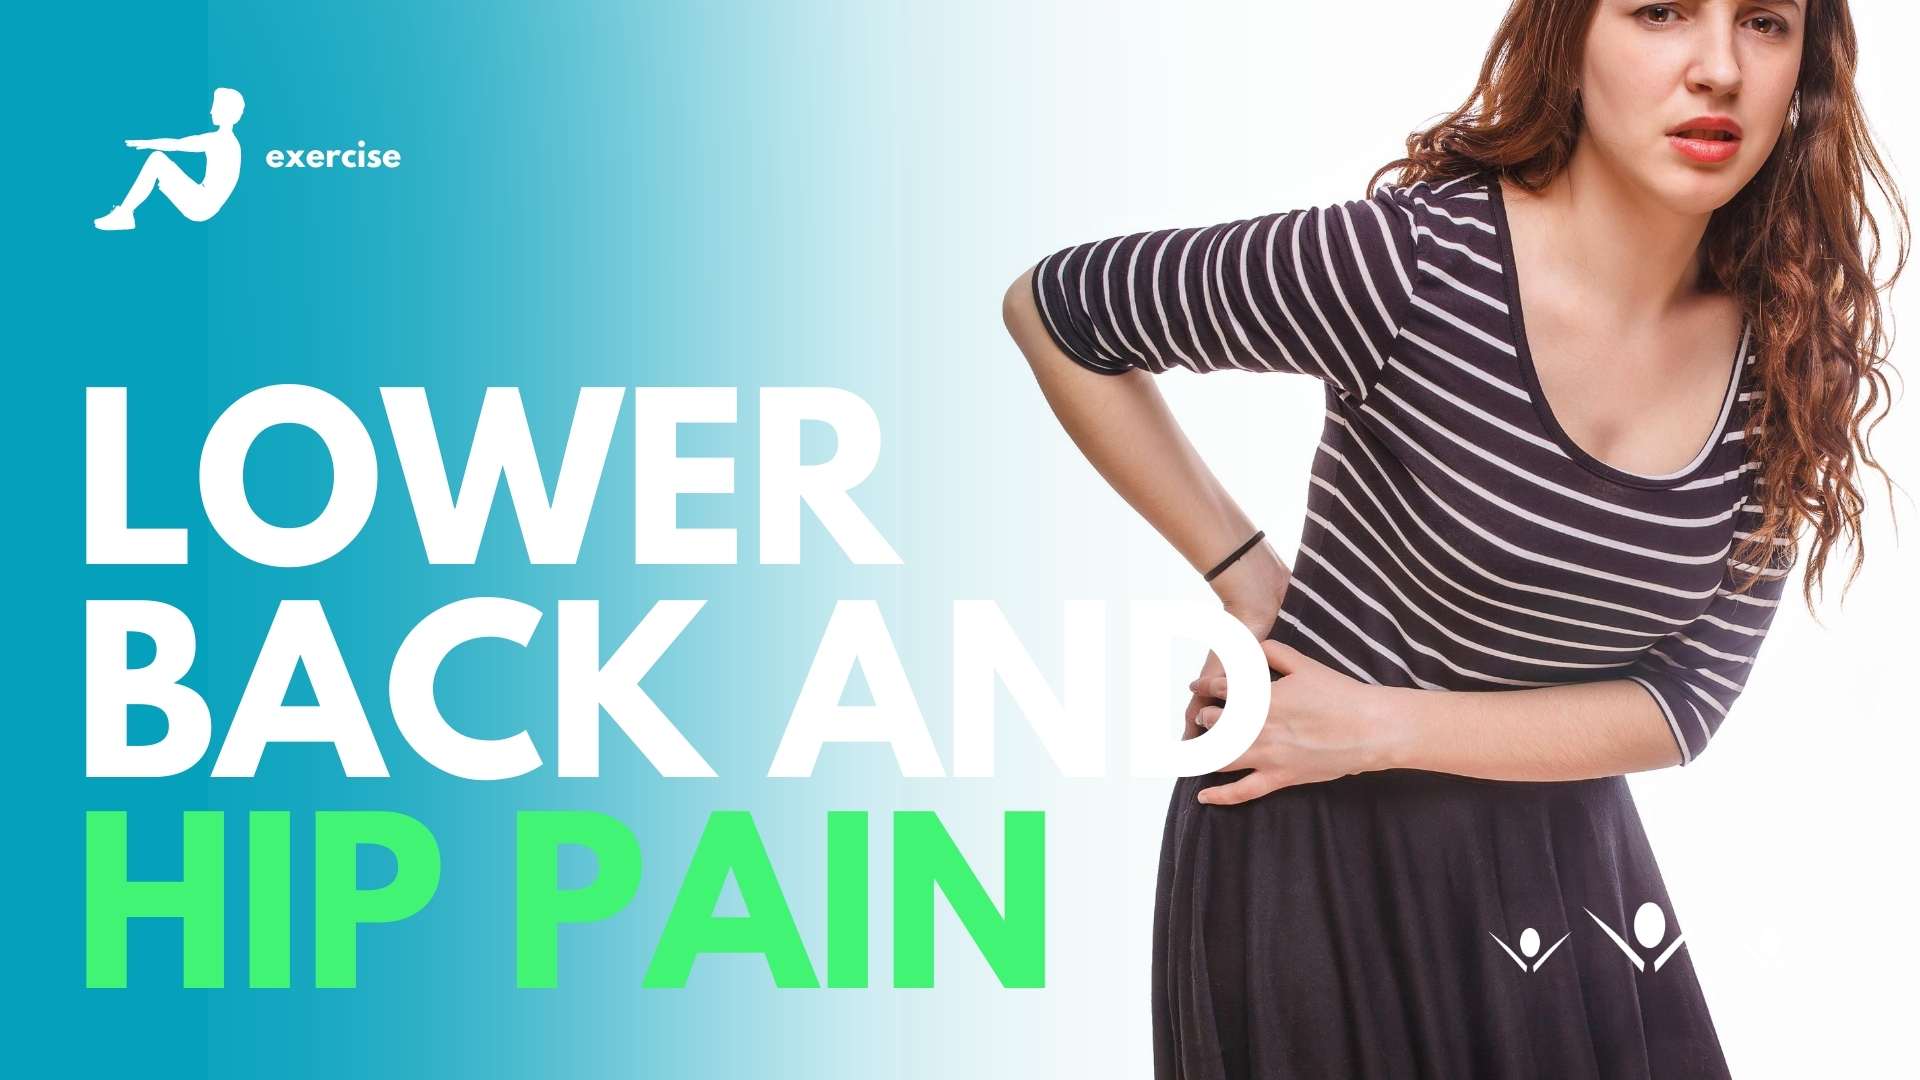 lower back and hip pain woman - Tucson chiropractor